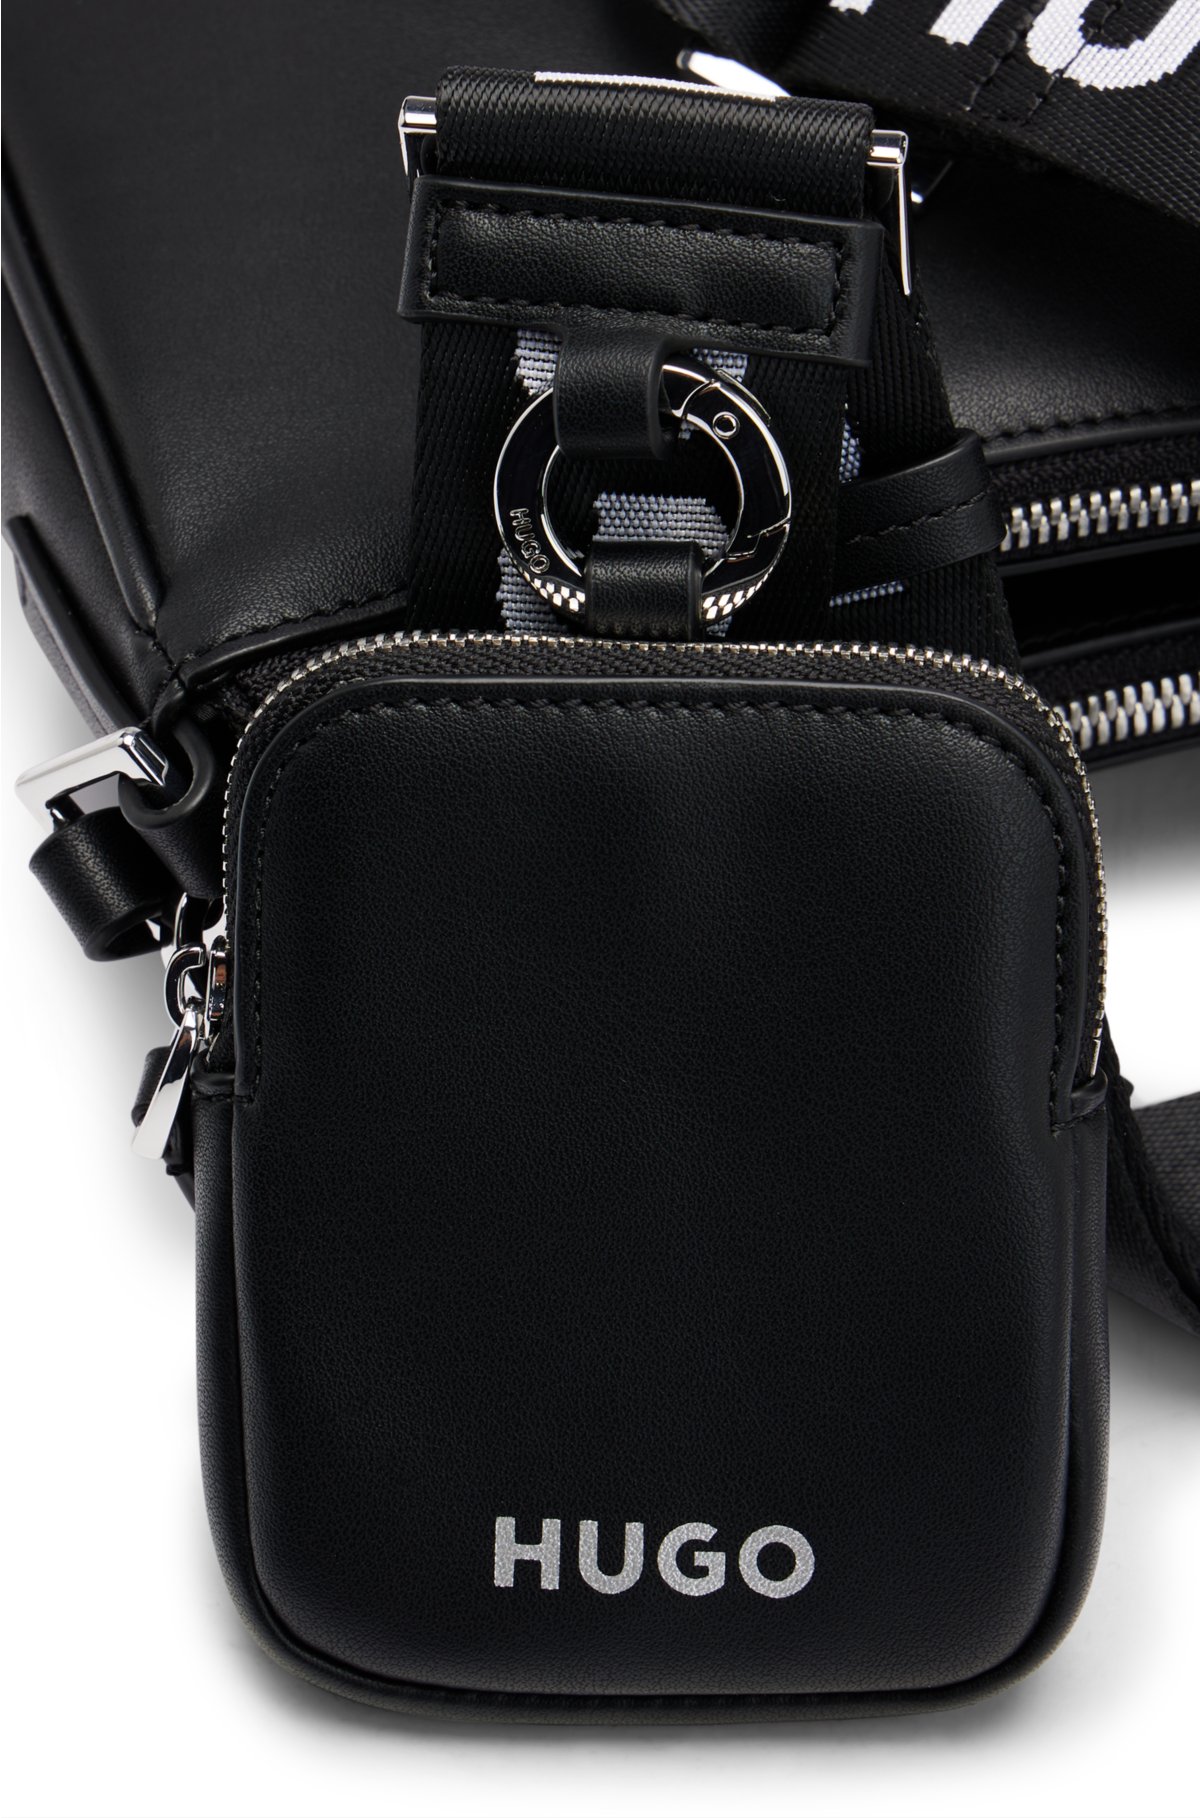 HUGO - Crossbody bag detachable and branding with debossed pouches